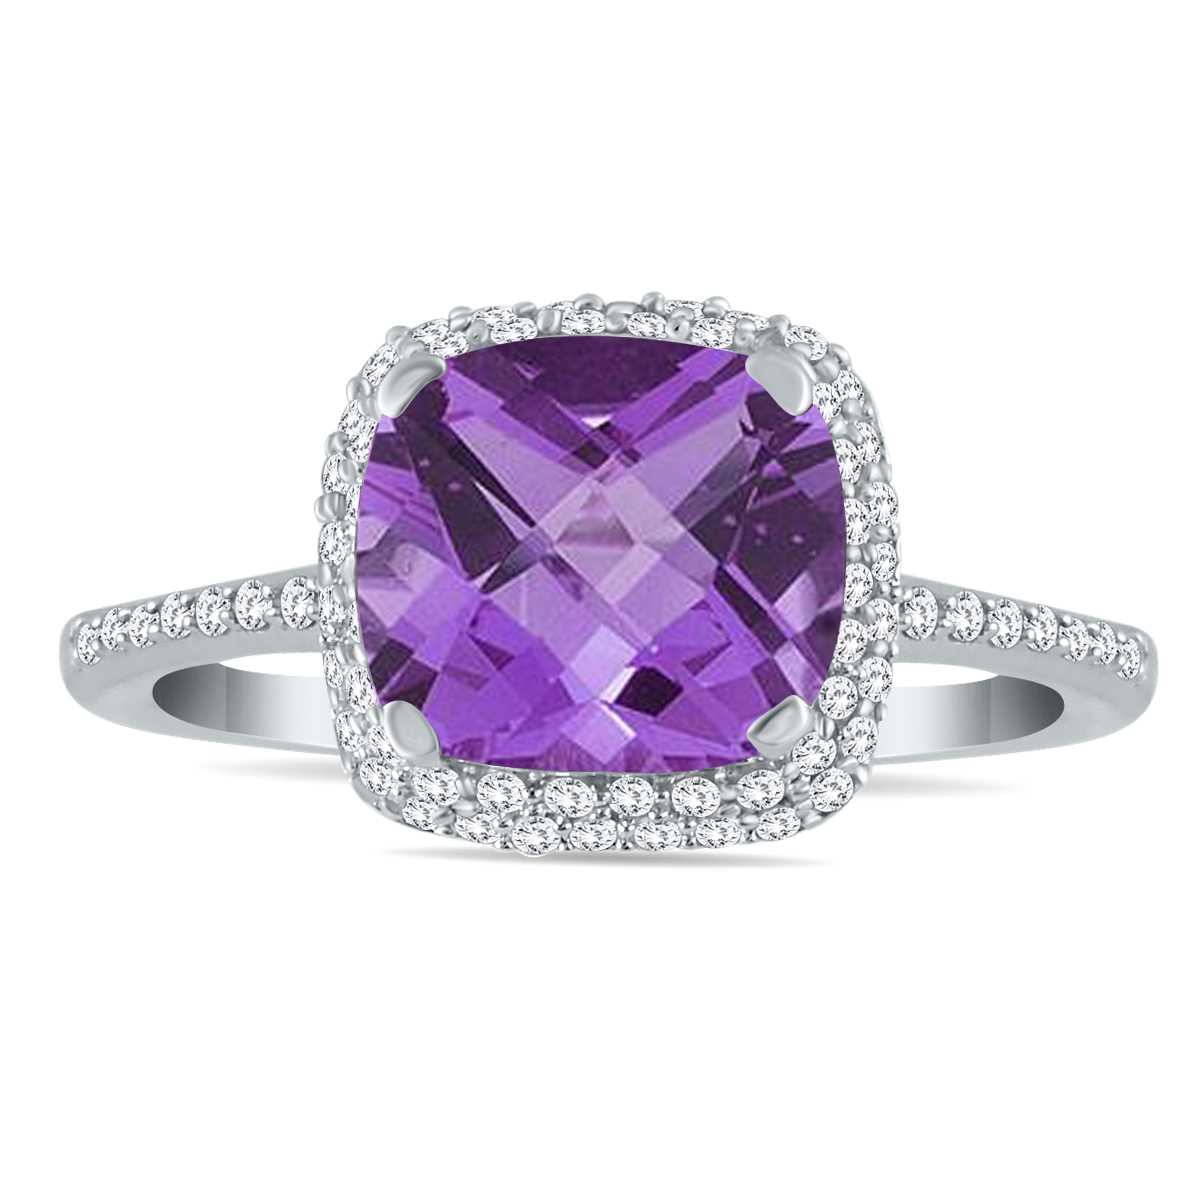 Cushion Cut Amethyst and Diamond Halo Ring in 10K White Gold